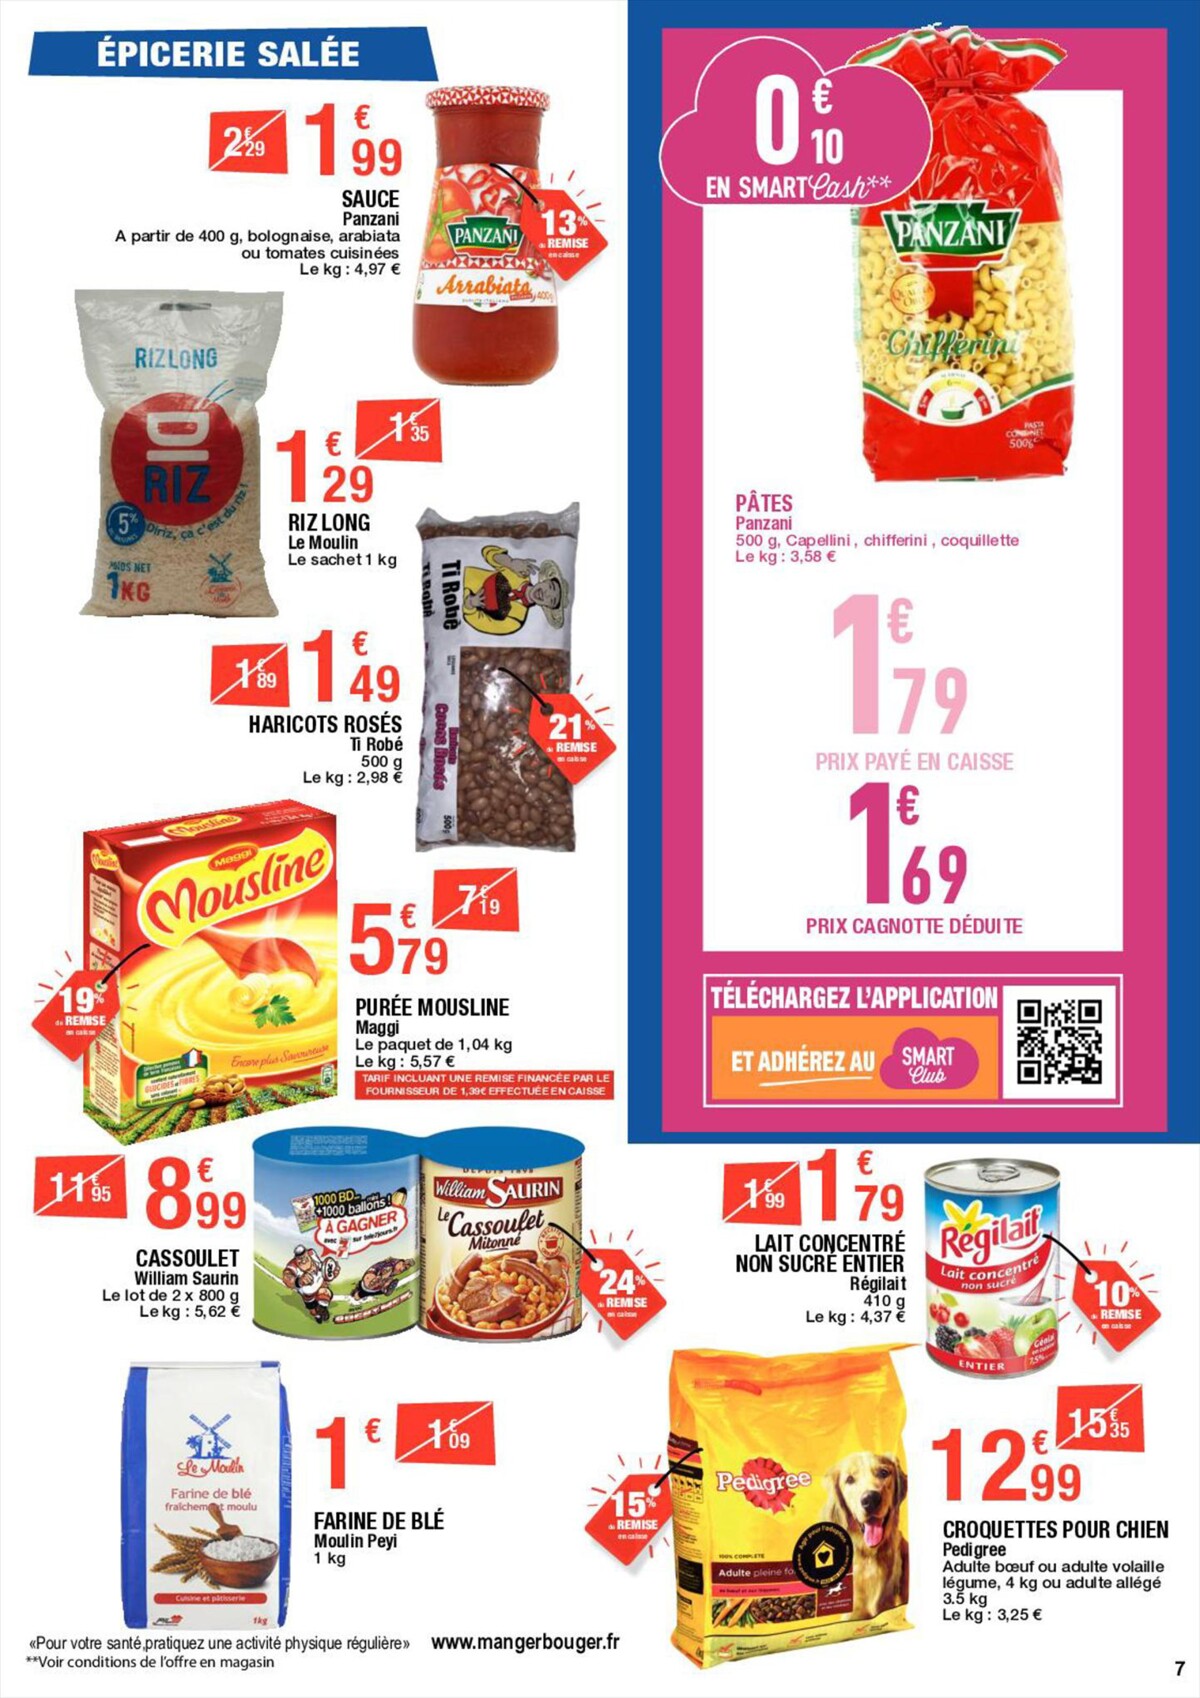 Catalogue Carrefour Special MDD, page 00007